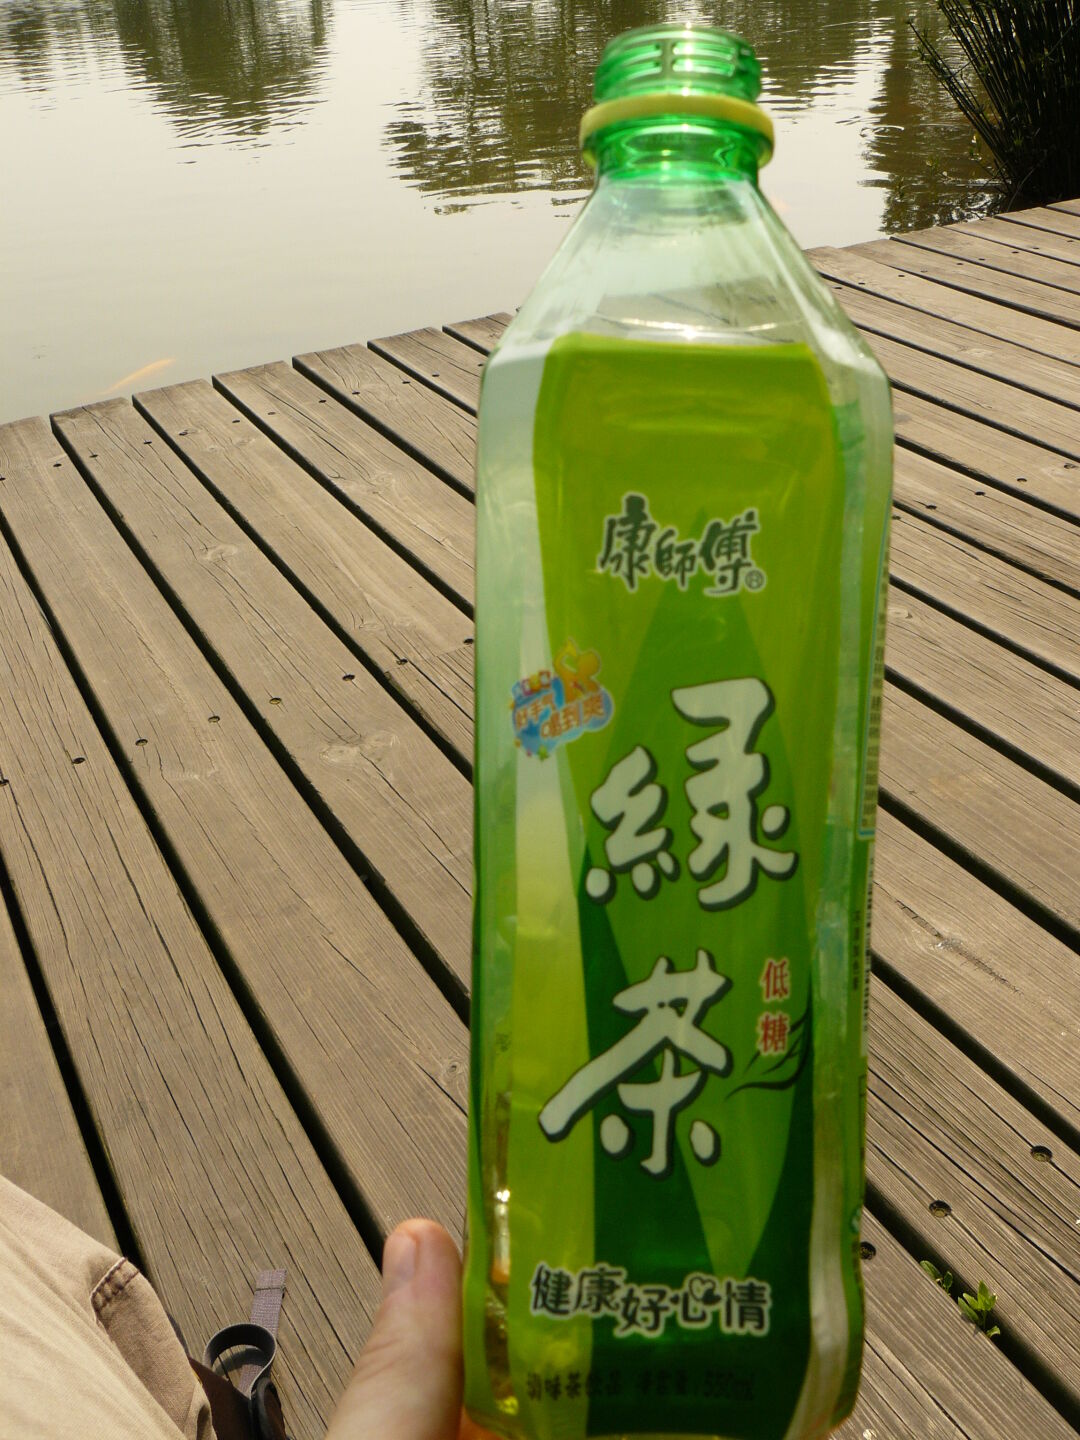 Looks poisonous but is bottled green tea. The lower of the two big white  symbols actually means 'tea'.